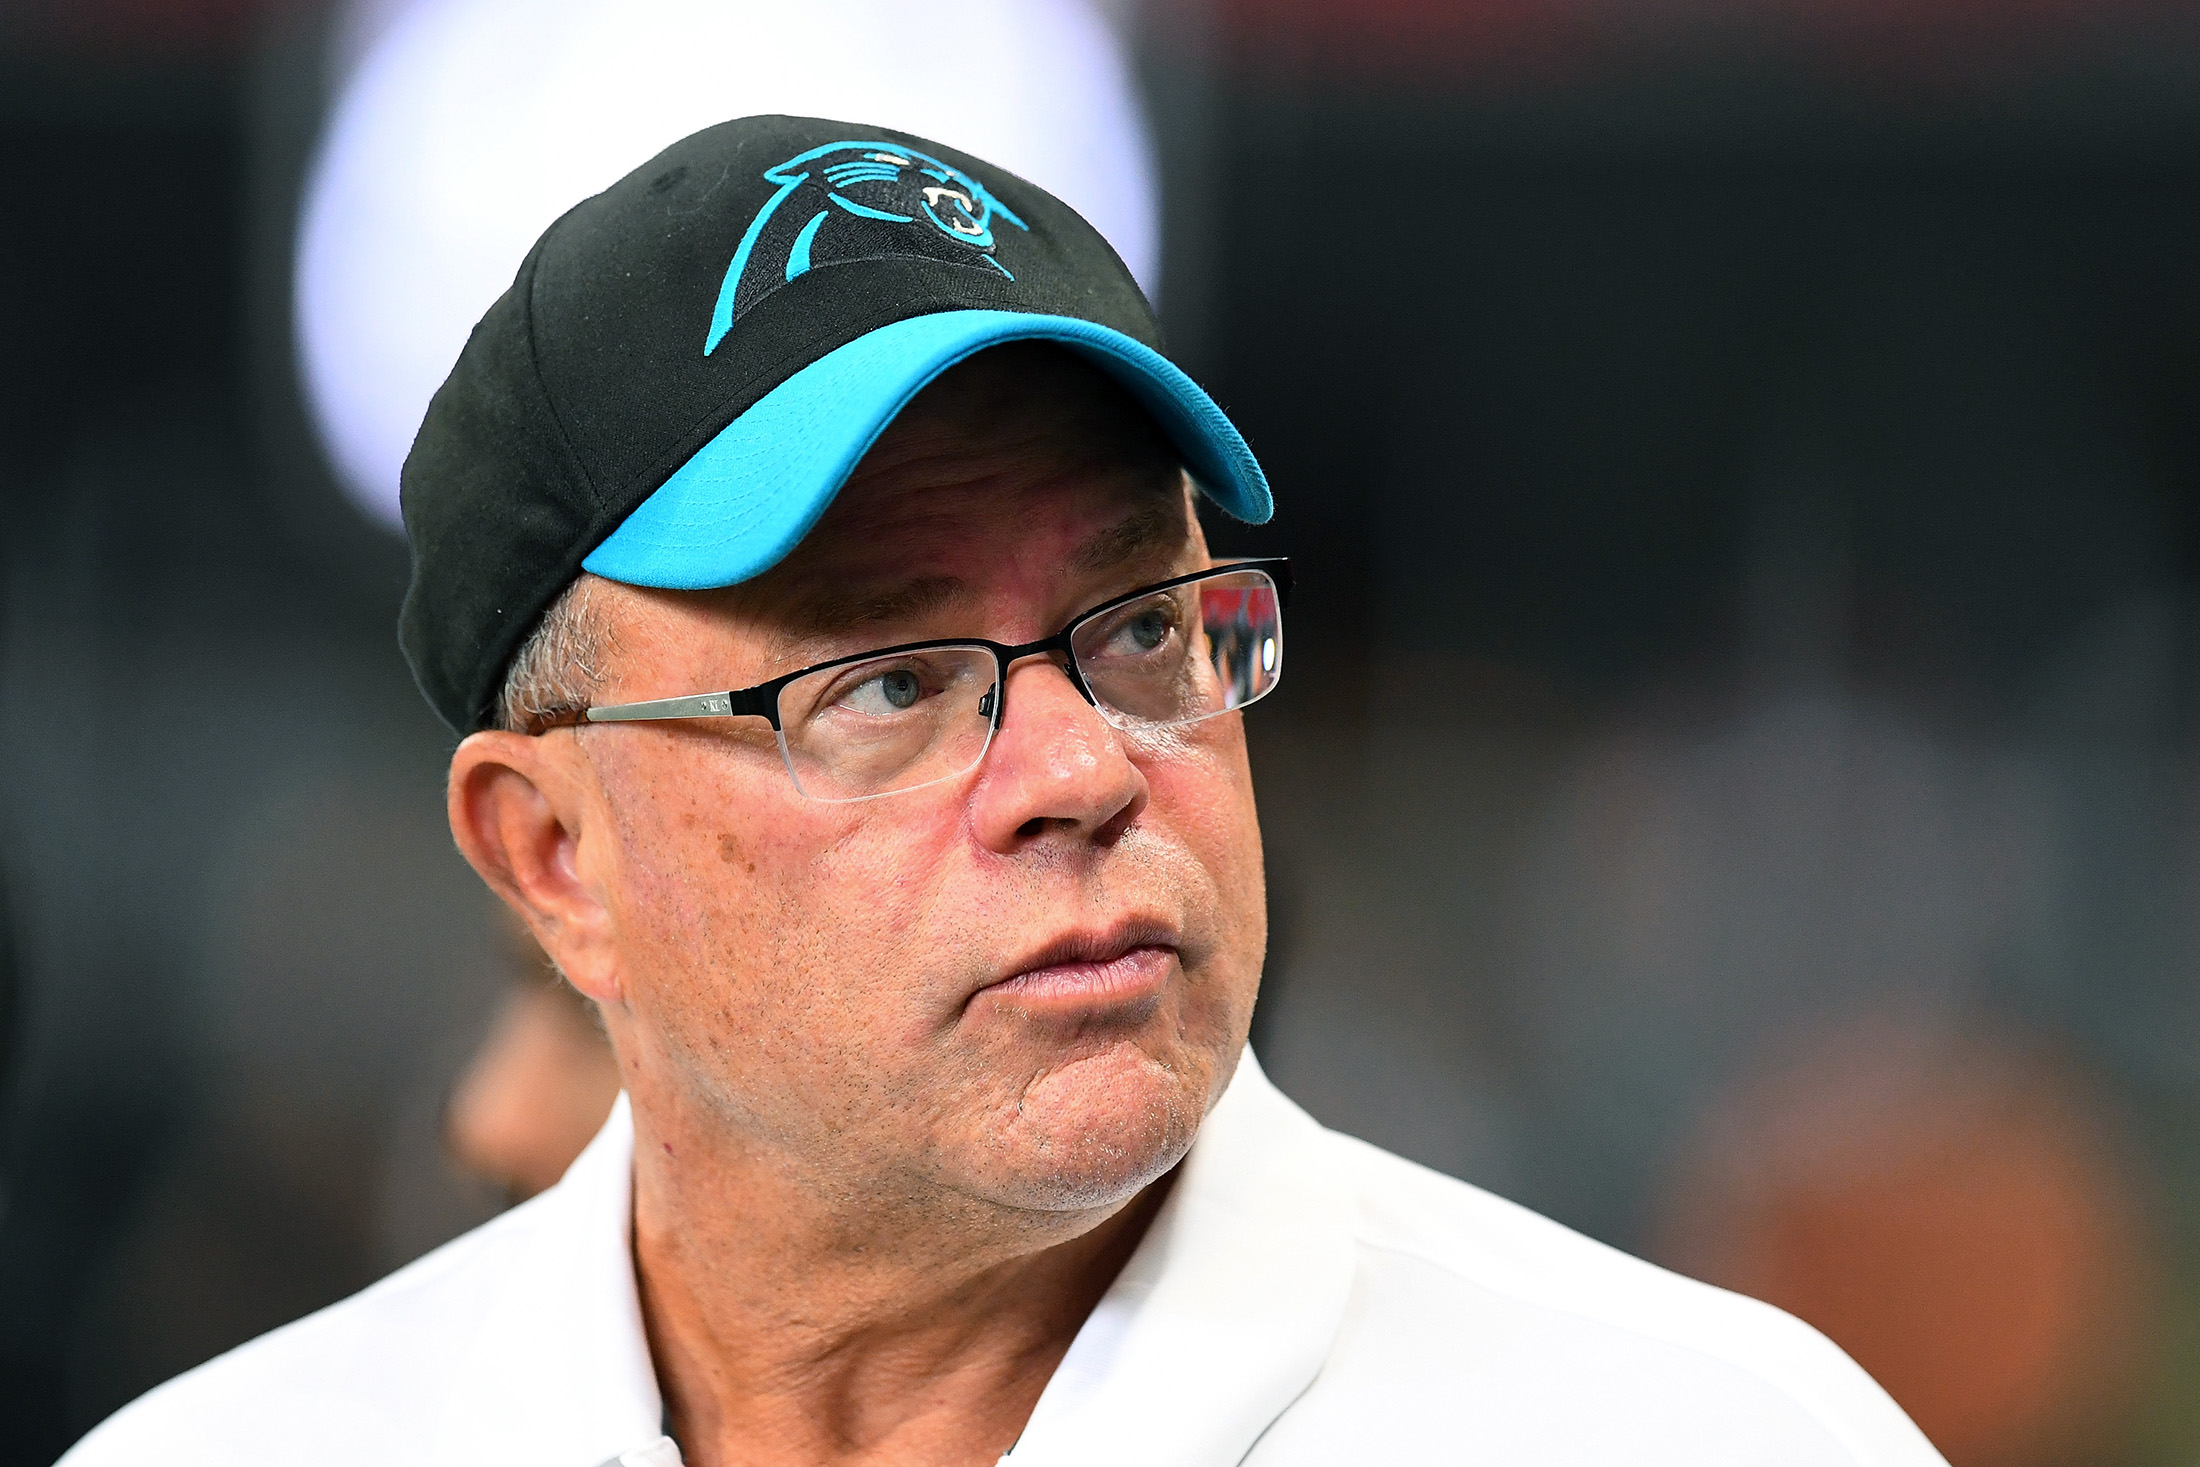 Carolina Panthers Owner David Tepper is preaching patience for his